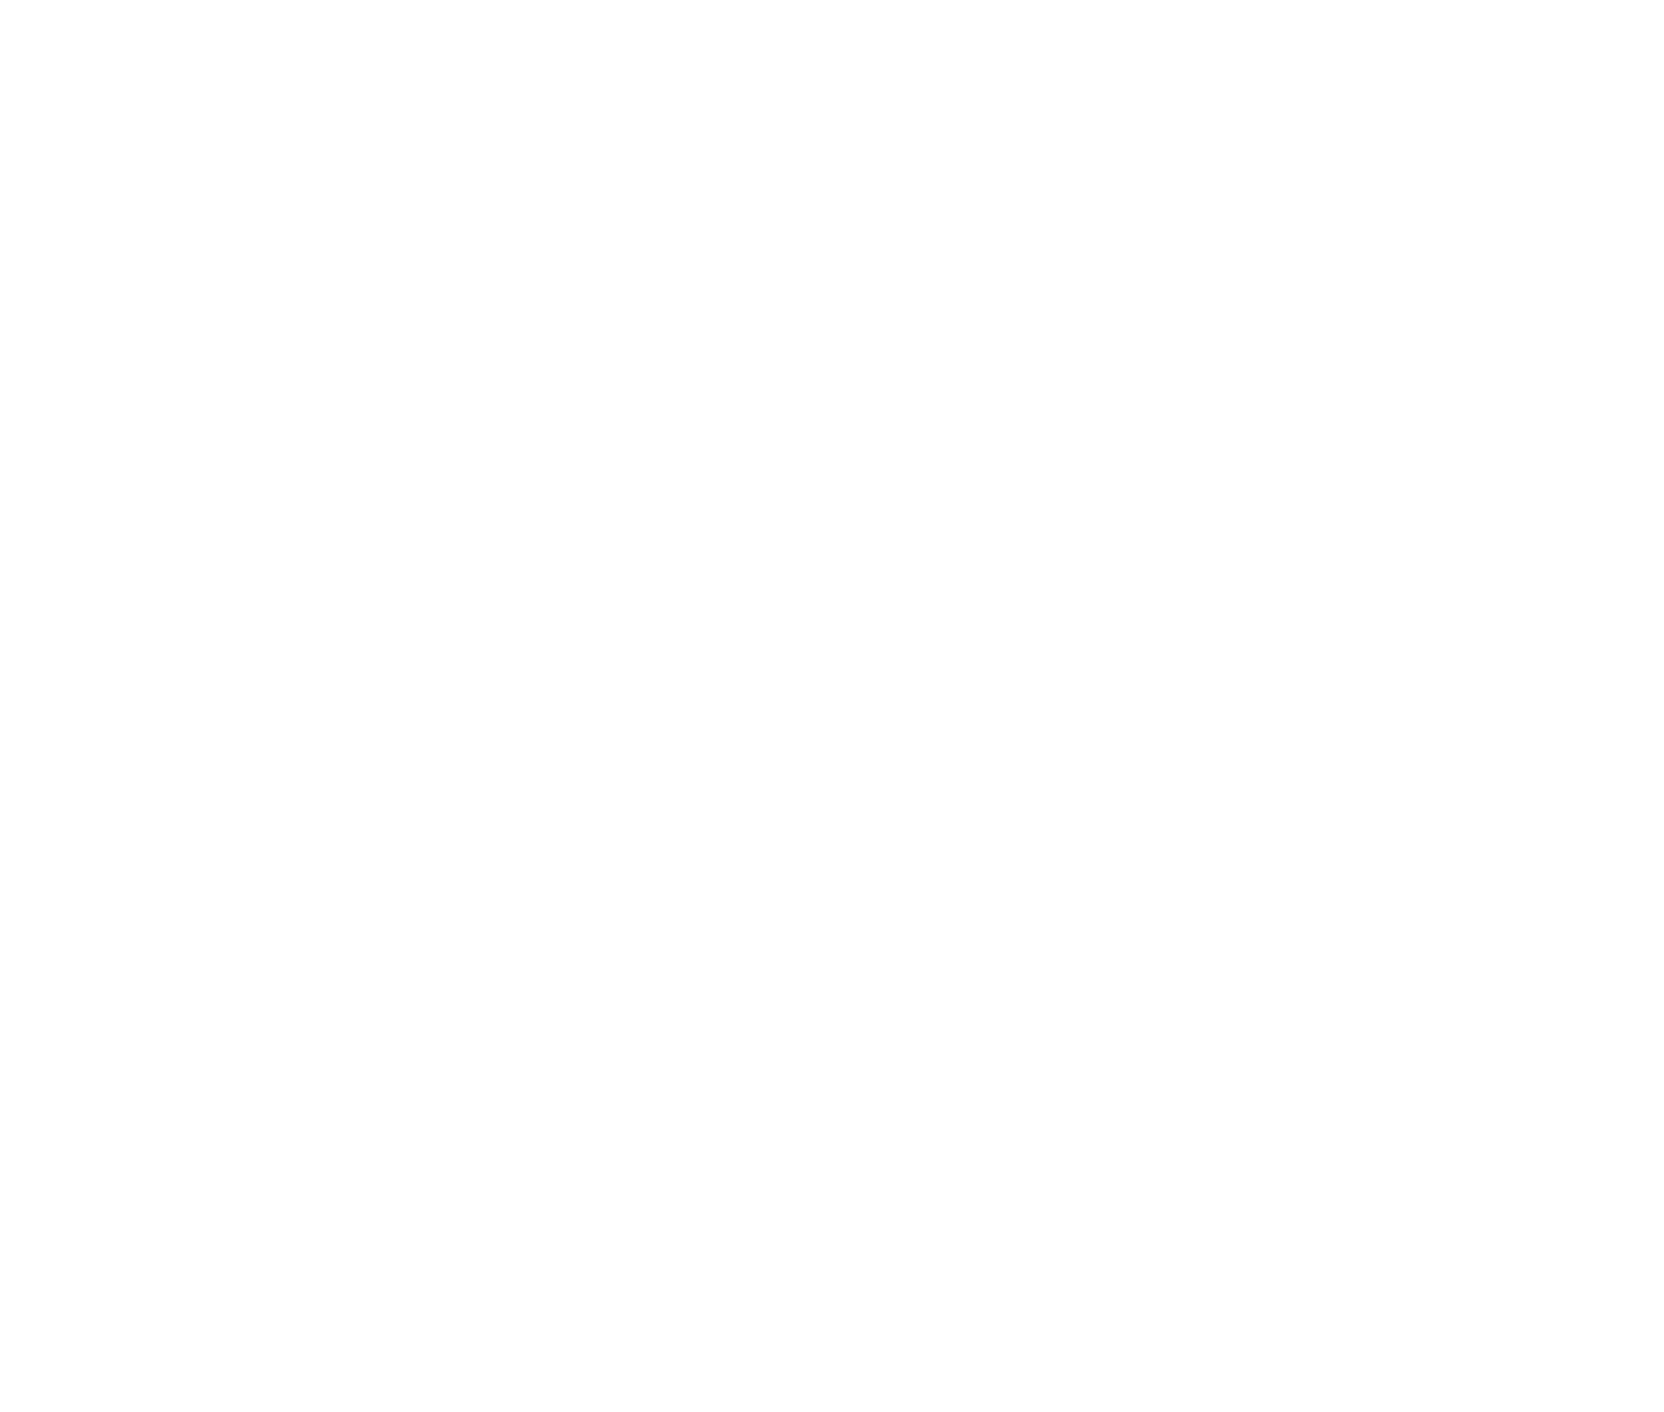 Our thoughts 解体の常識を壊したい。